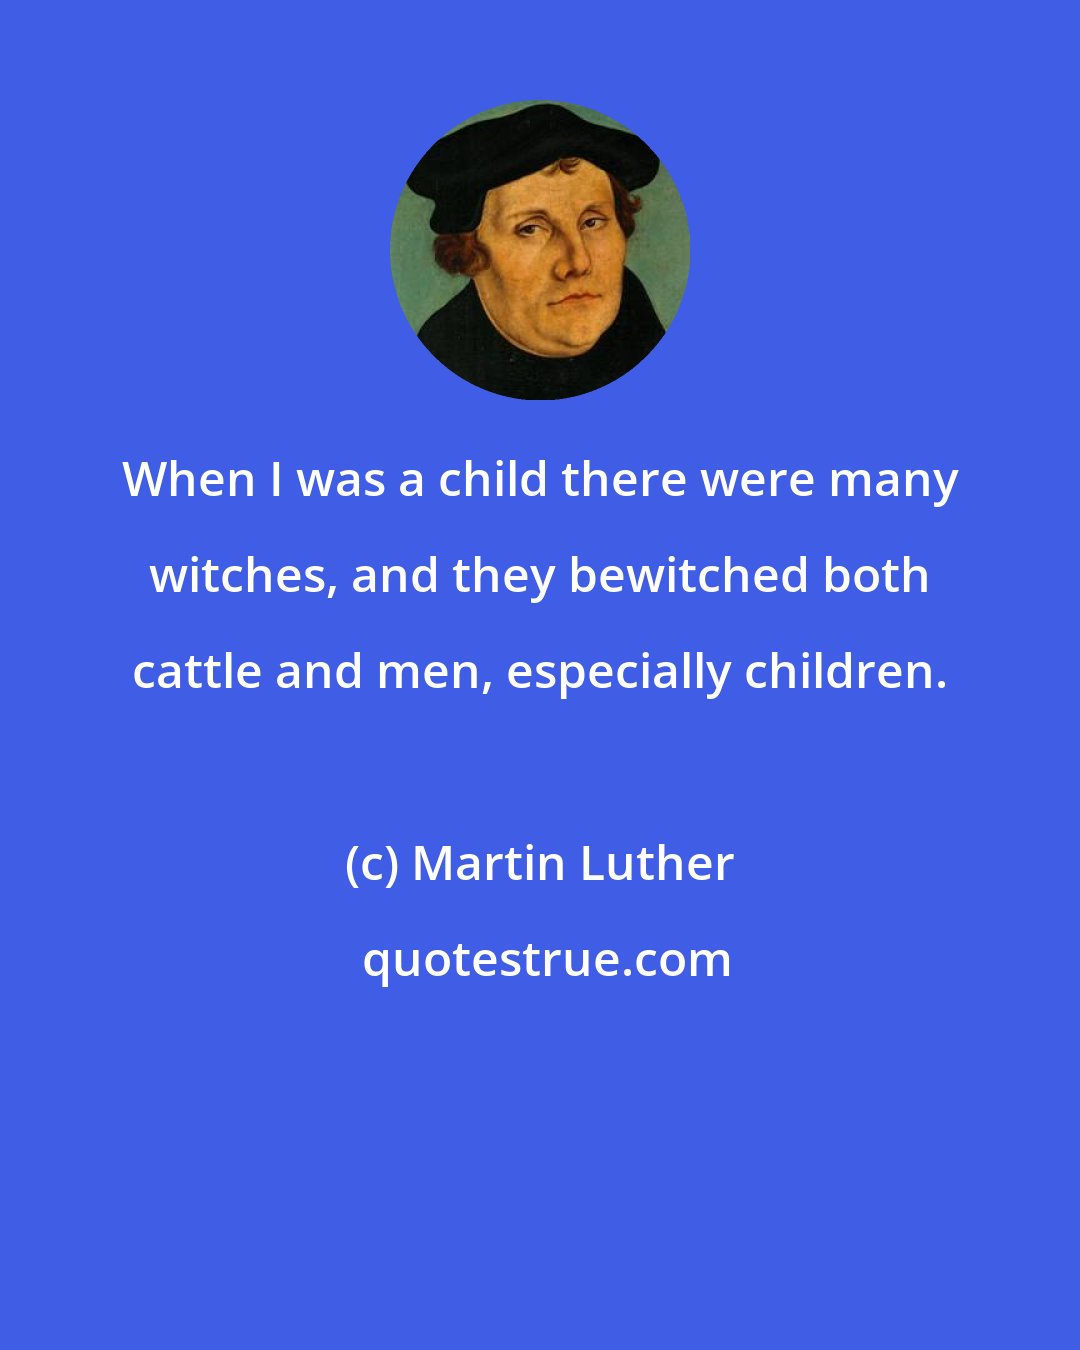 Martin Luther: When I was a child there were many witches, and they bewitched both cattle and men, especially children.